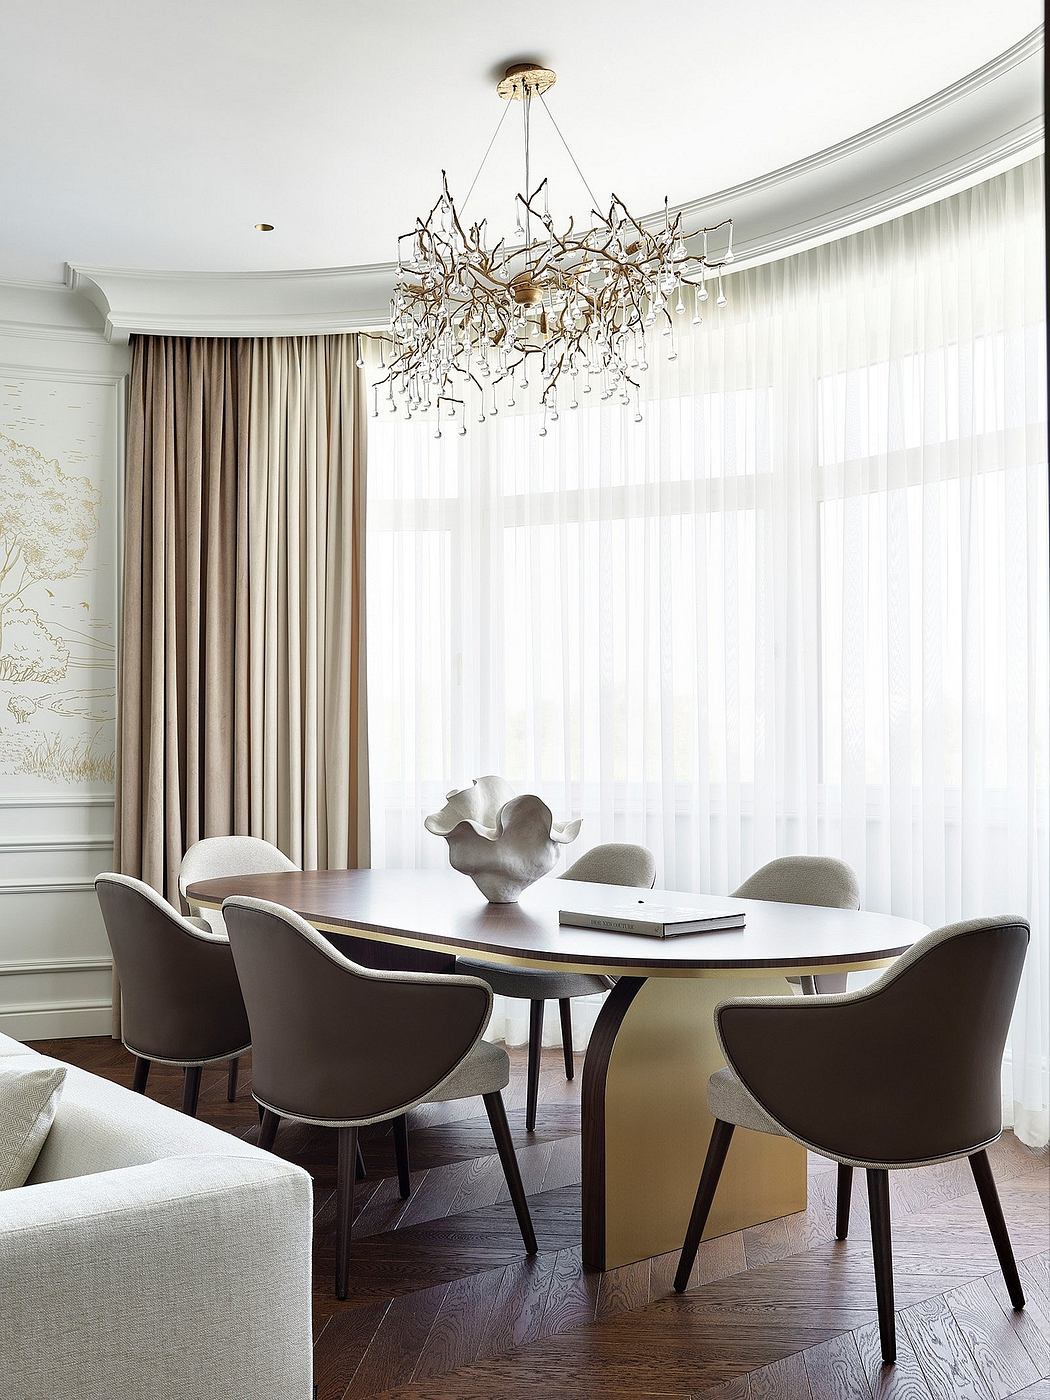 Elegant dining room with curved curtains, a striking chandelier, and stylish furniture.